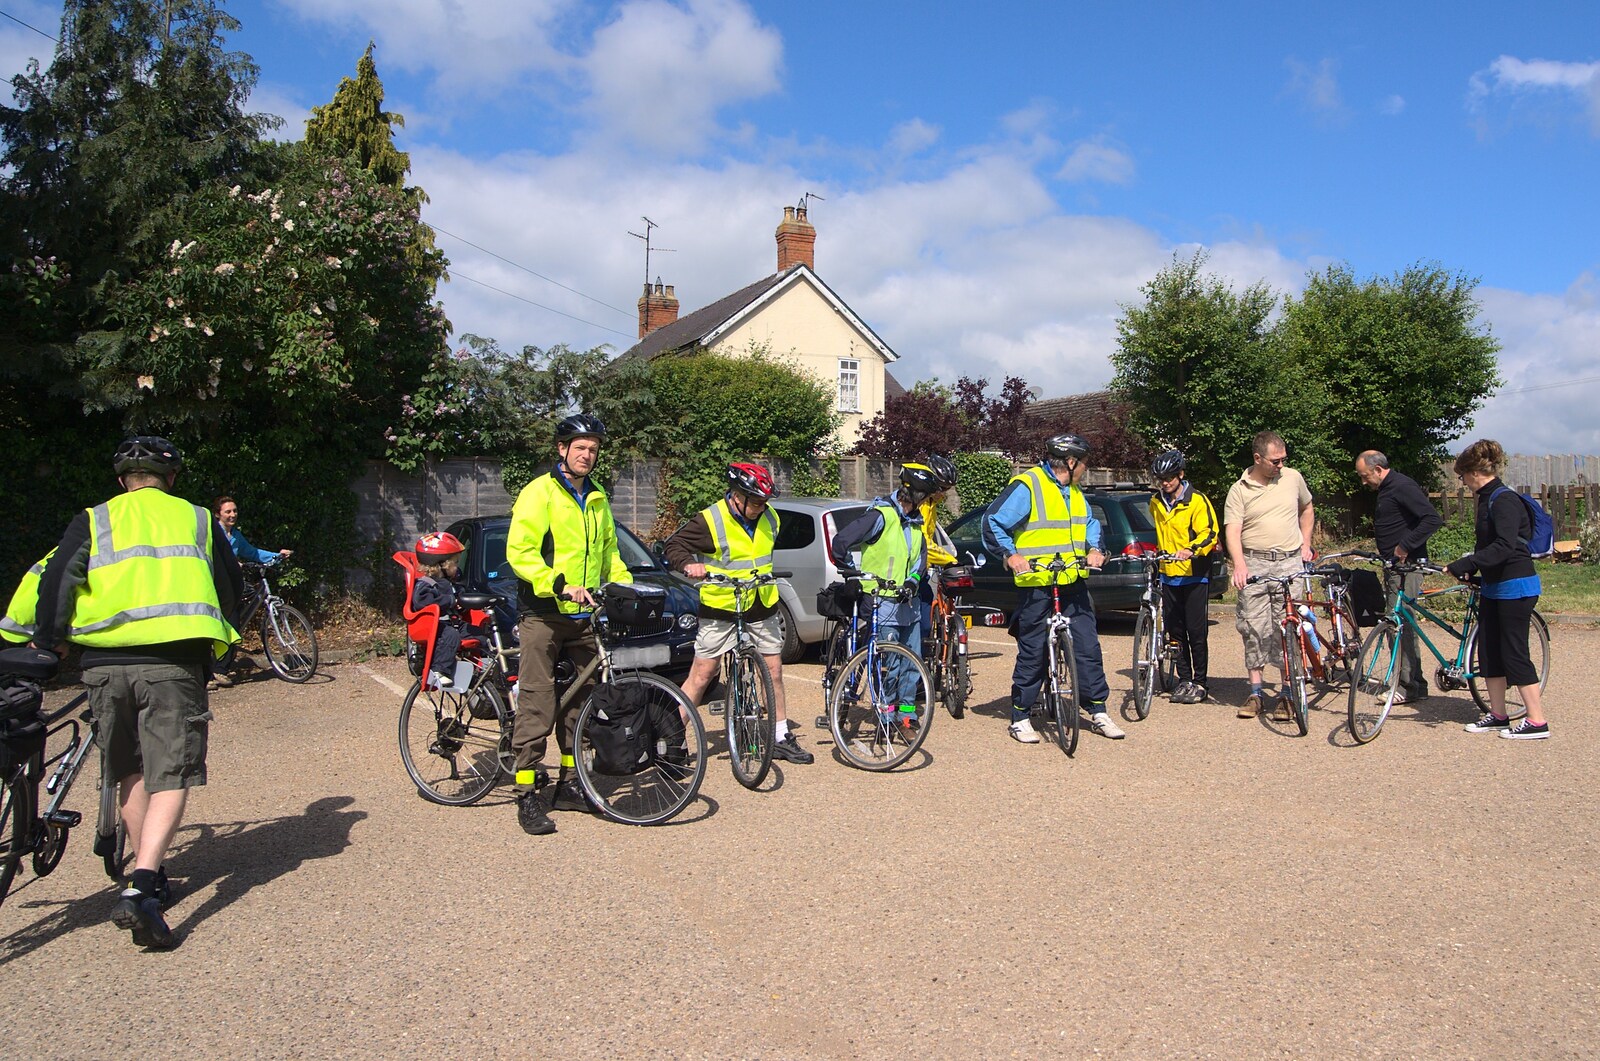 The BSCC assembles for a photo from The BSCC Weekend at Rutland Water, Empingham, Rutland - 14th May 2011